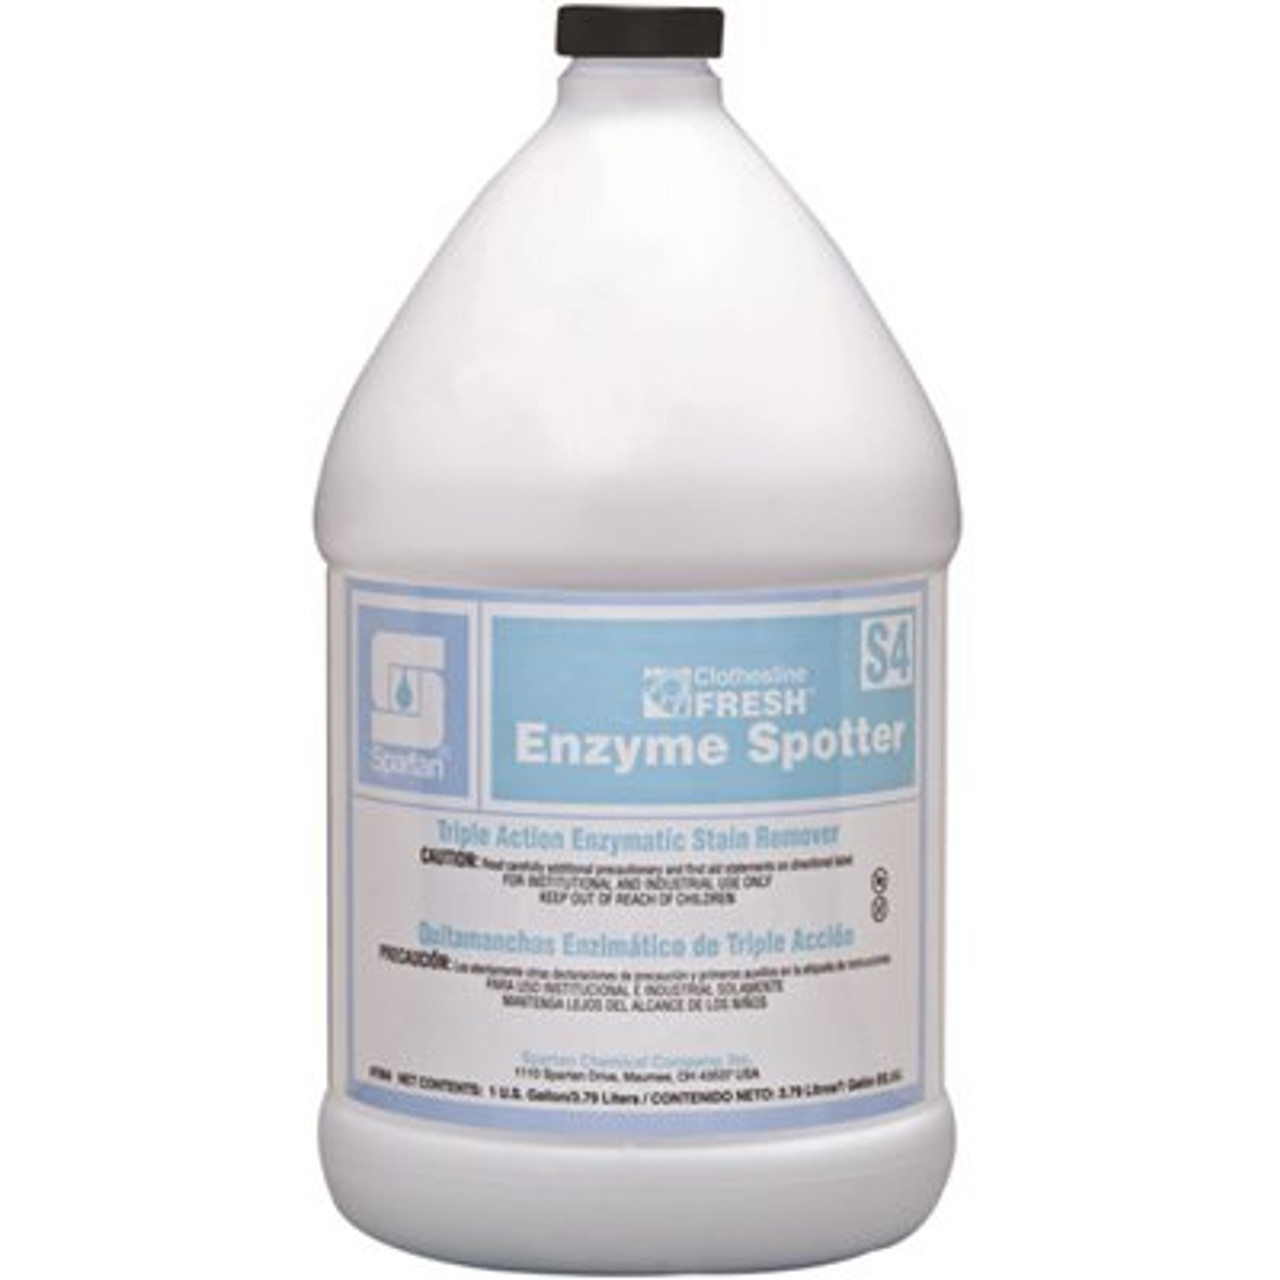 Spartan Chemical Co. Clothesline Fresh S4 1 Gallon Enzyme Spotter (4 Per Pack)